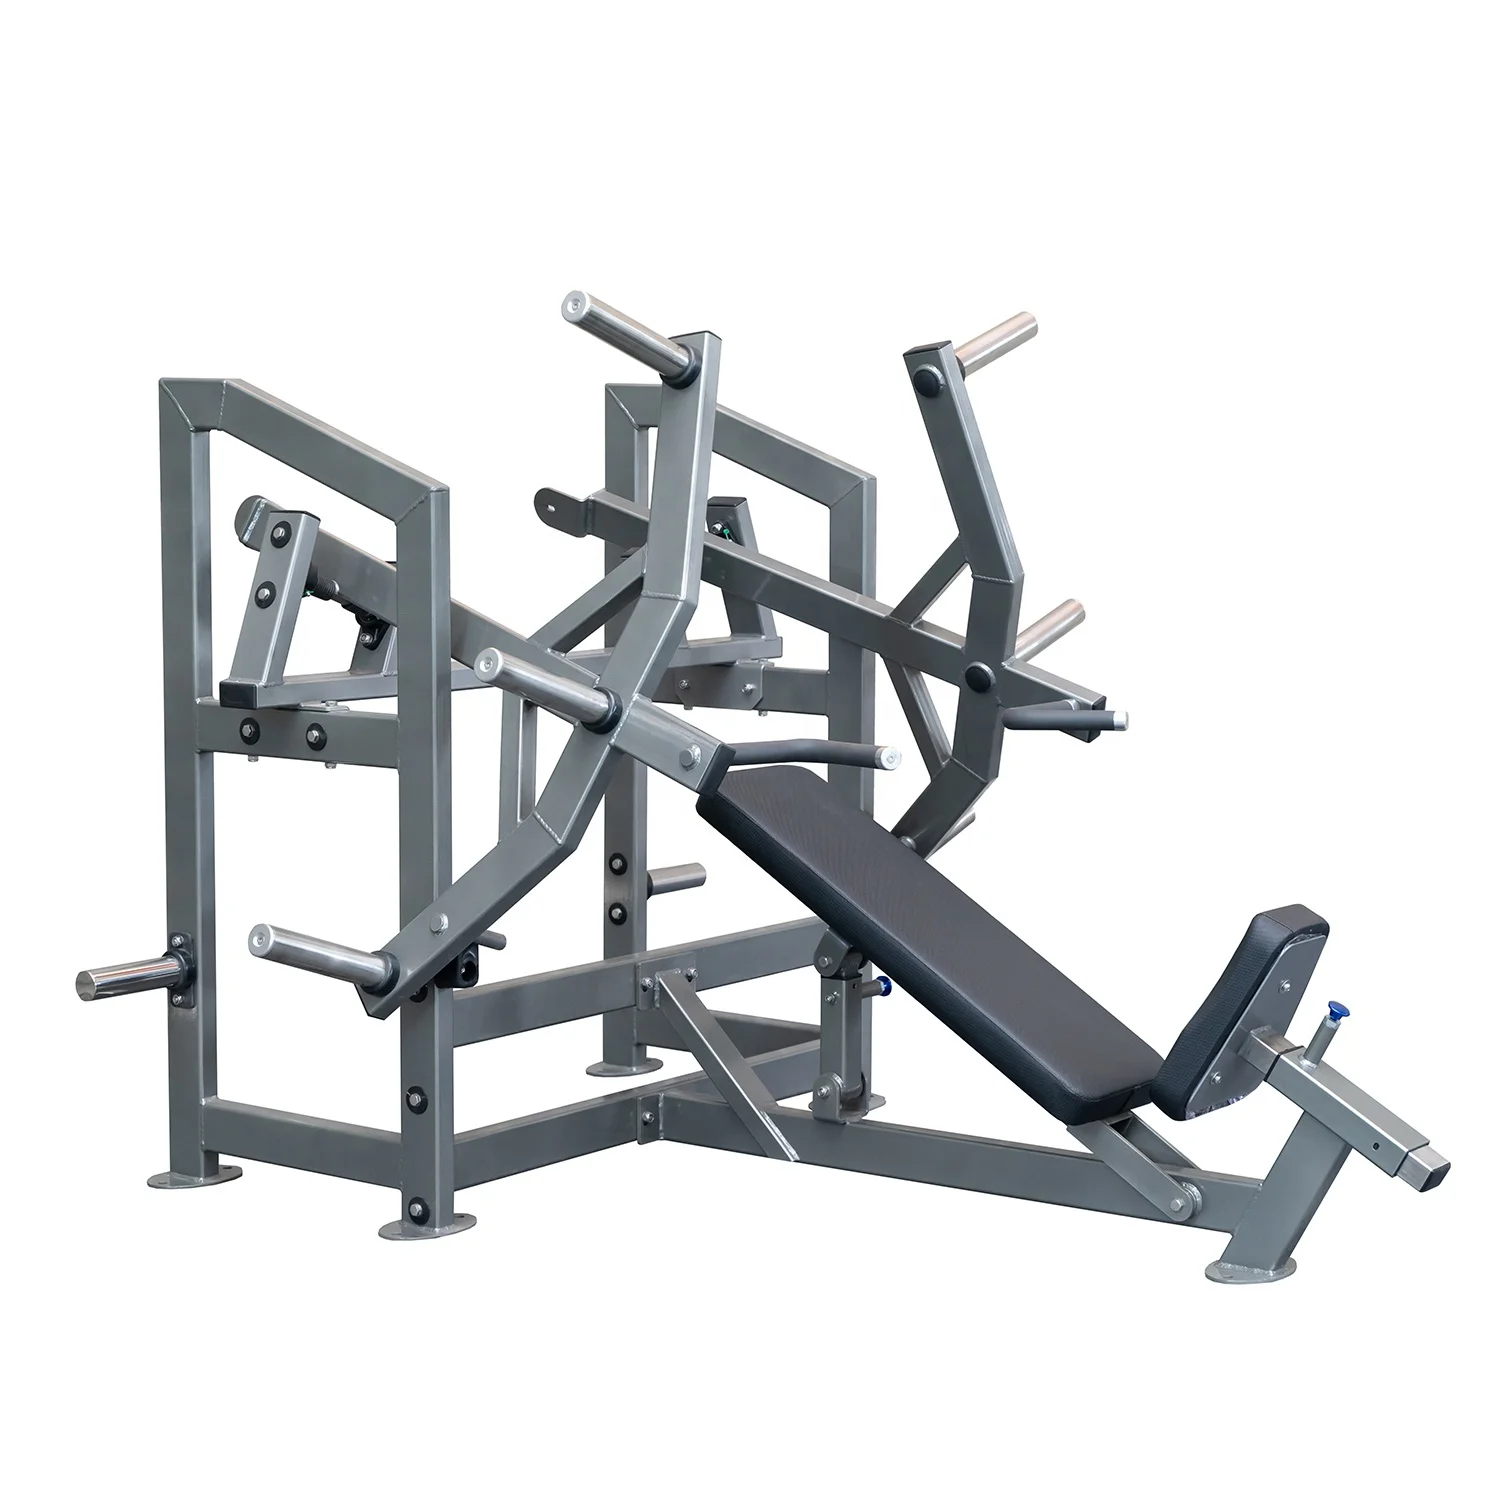 Flat Prime fitness rowing, For Upper Chest